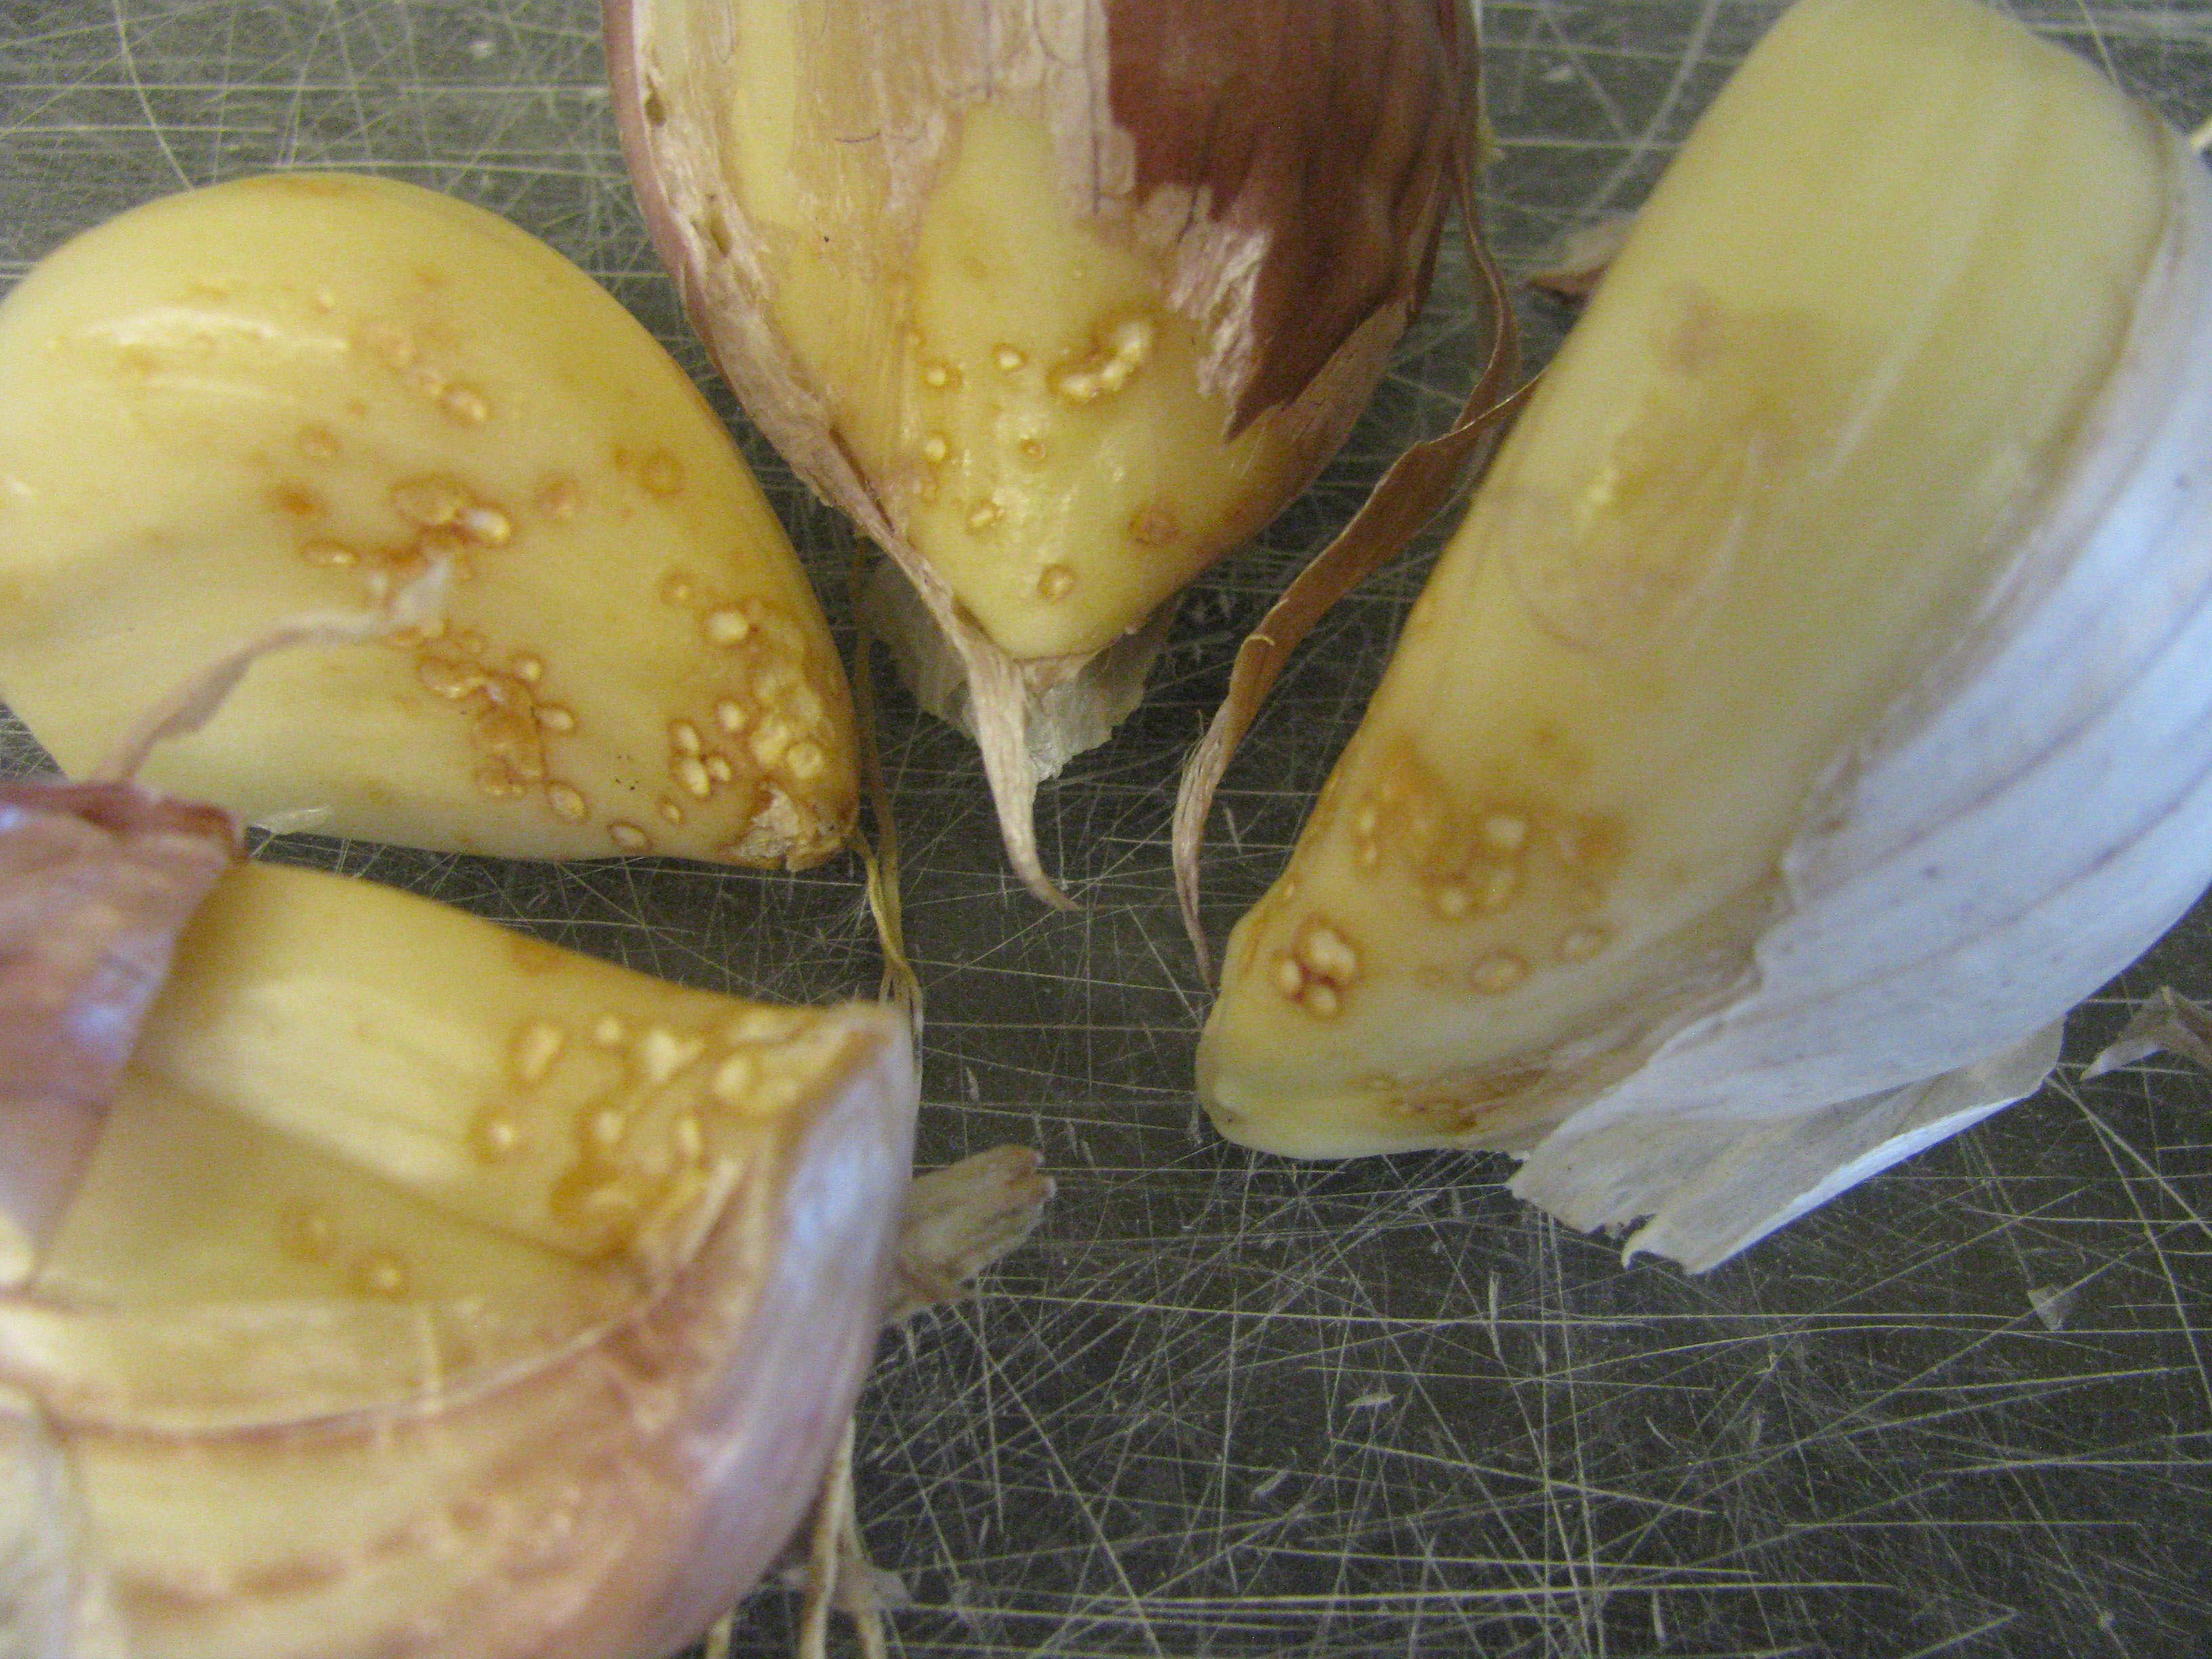 Damage to garlic cloves caused by eriophyid mite feeding.